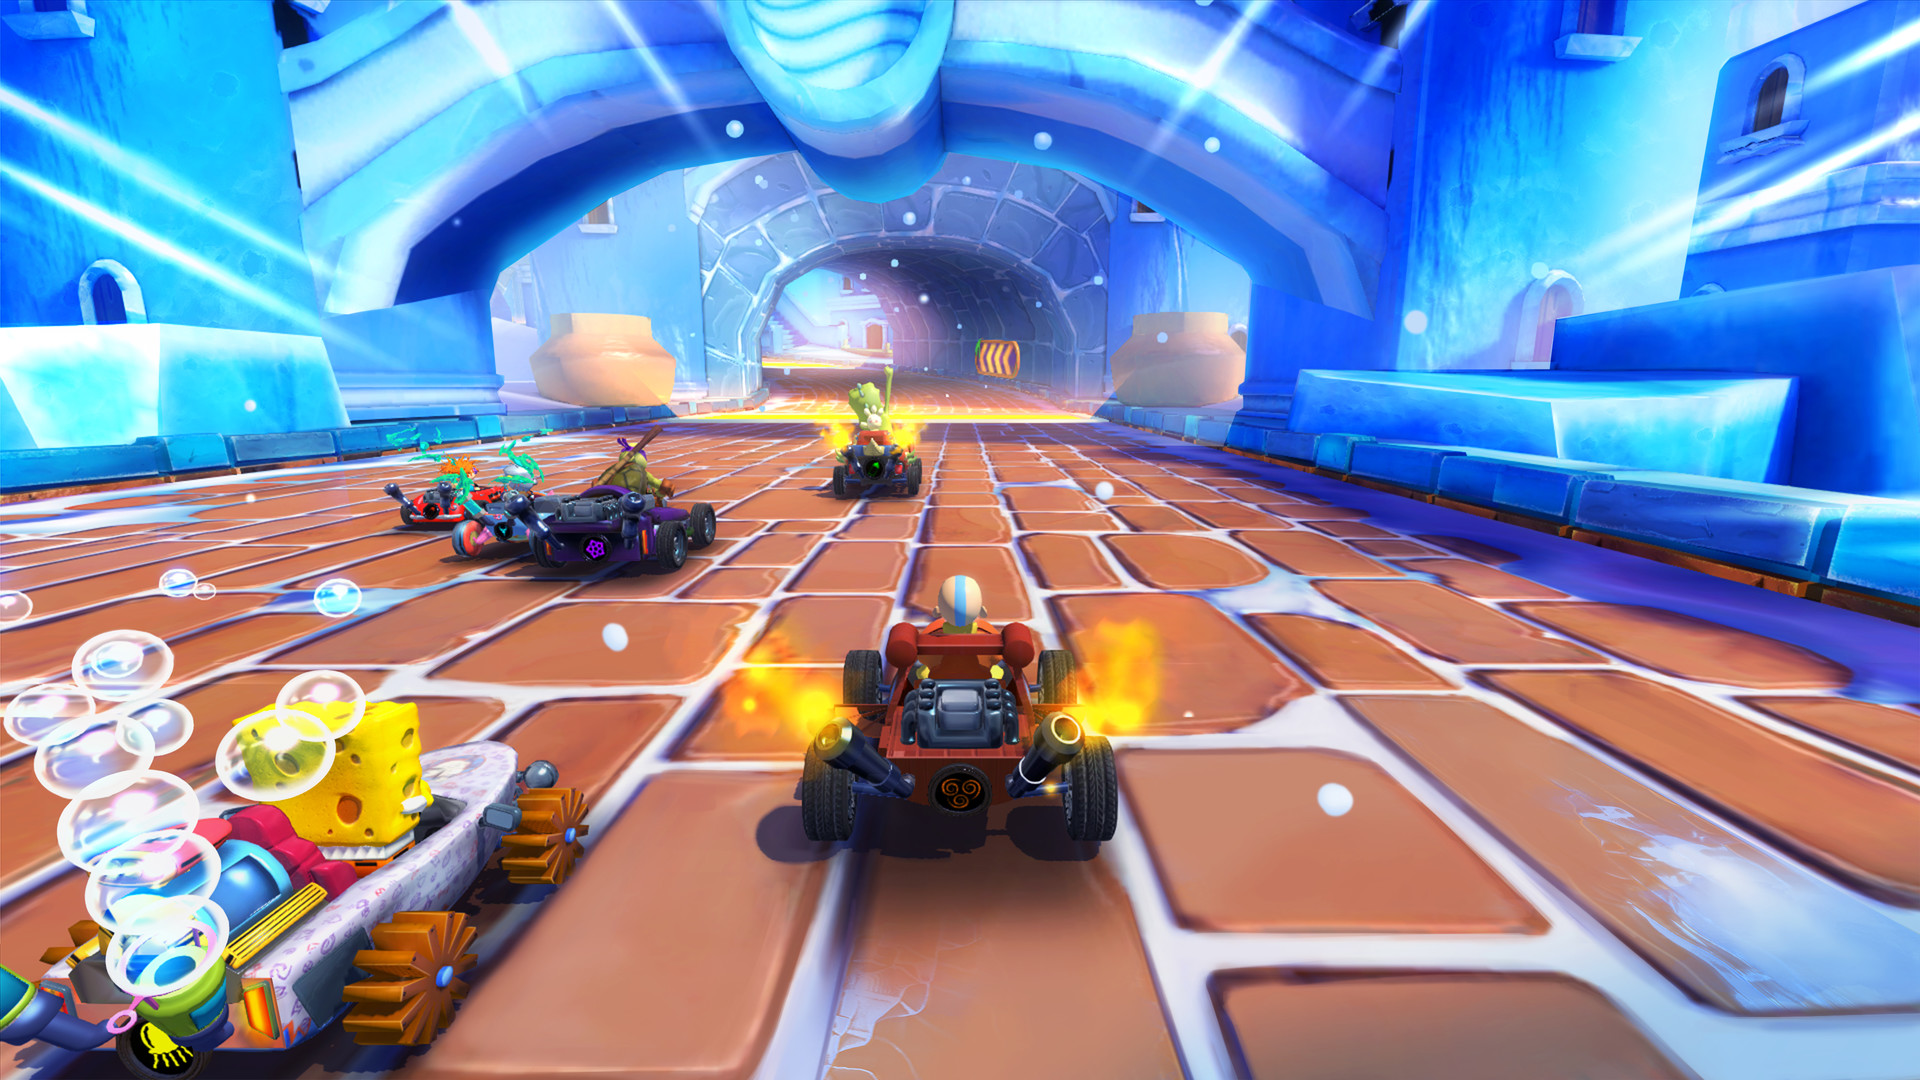 Nickelodeon Kart Racers for Android - Free App Download